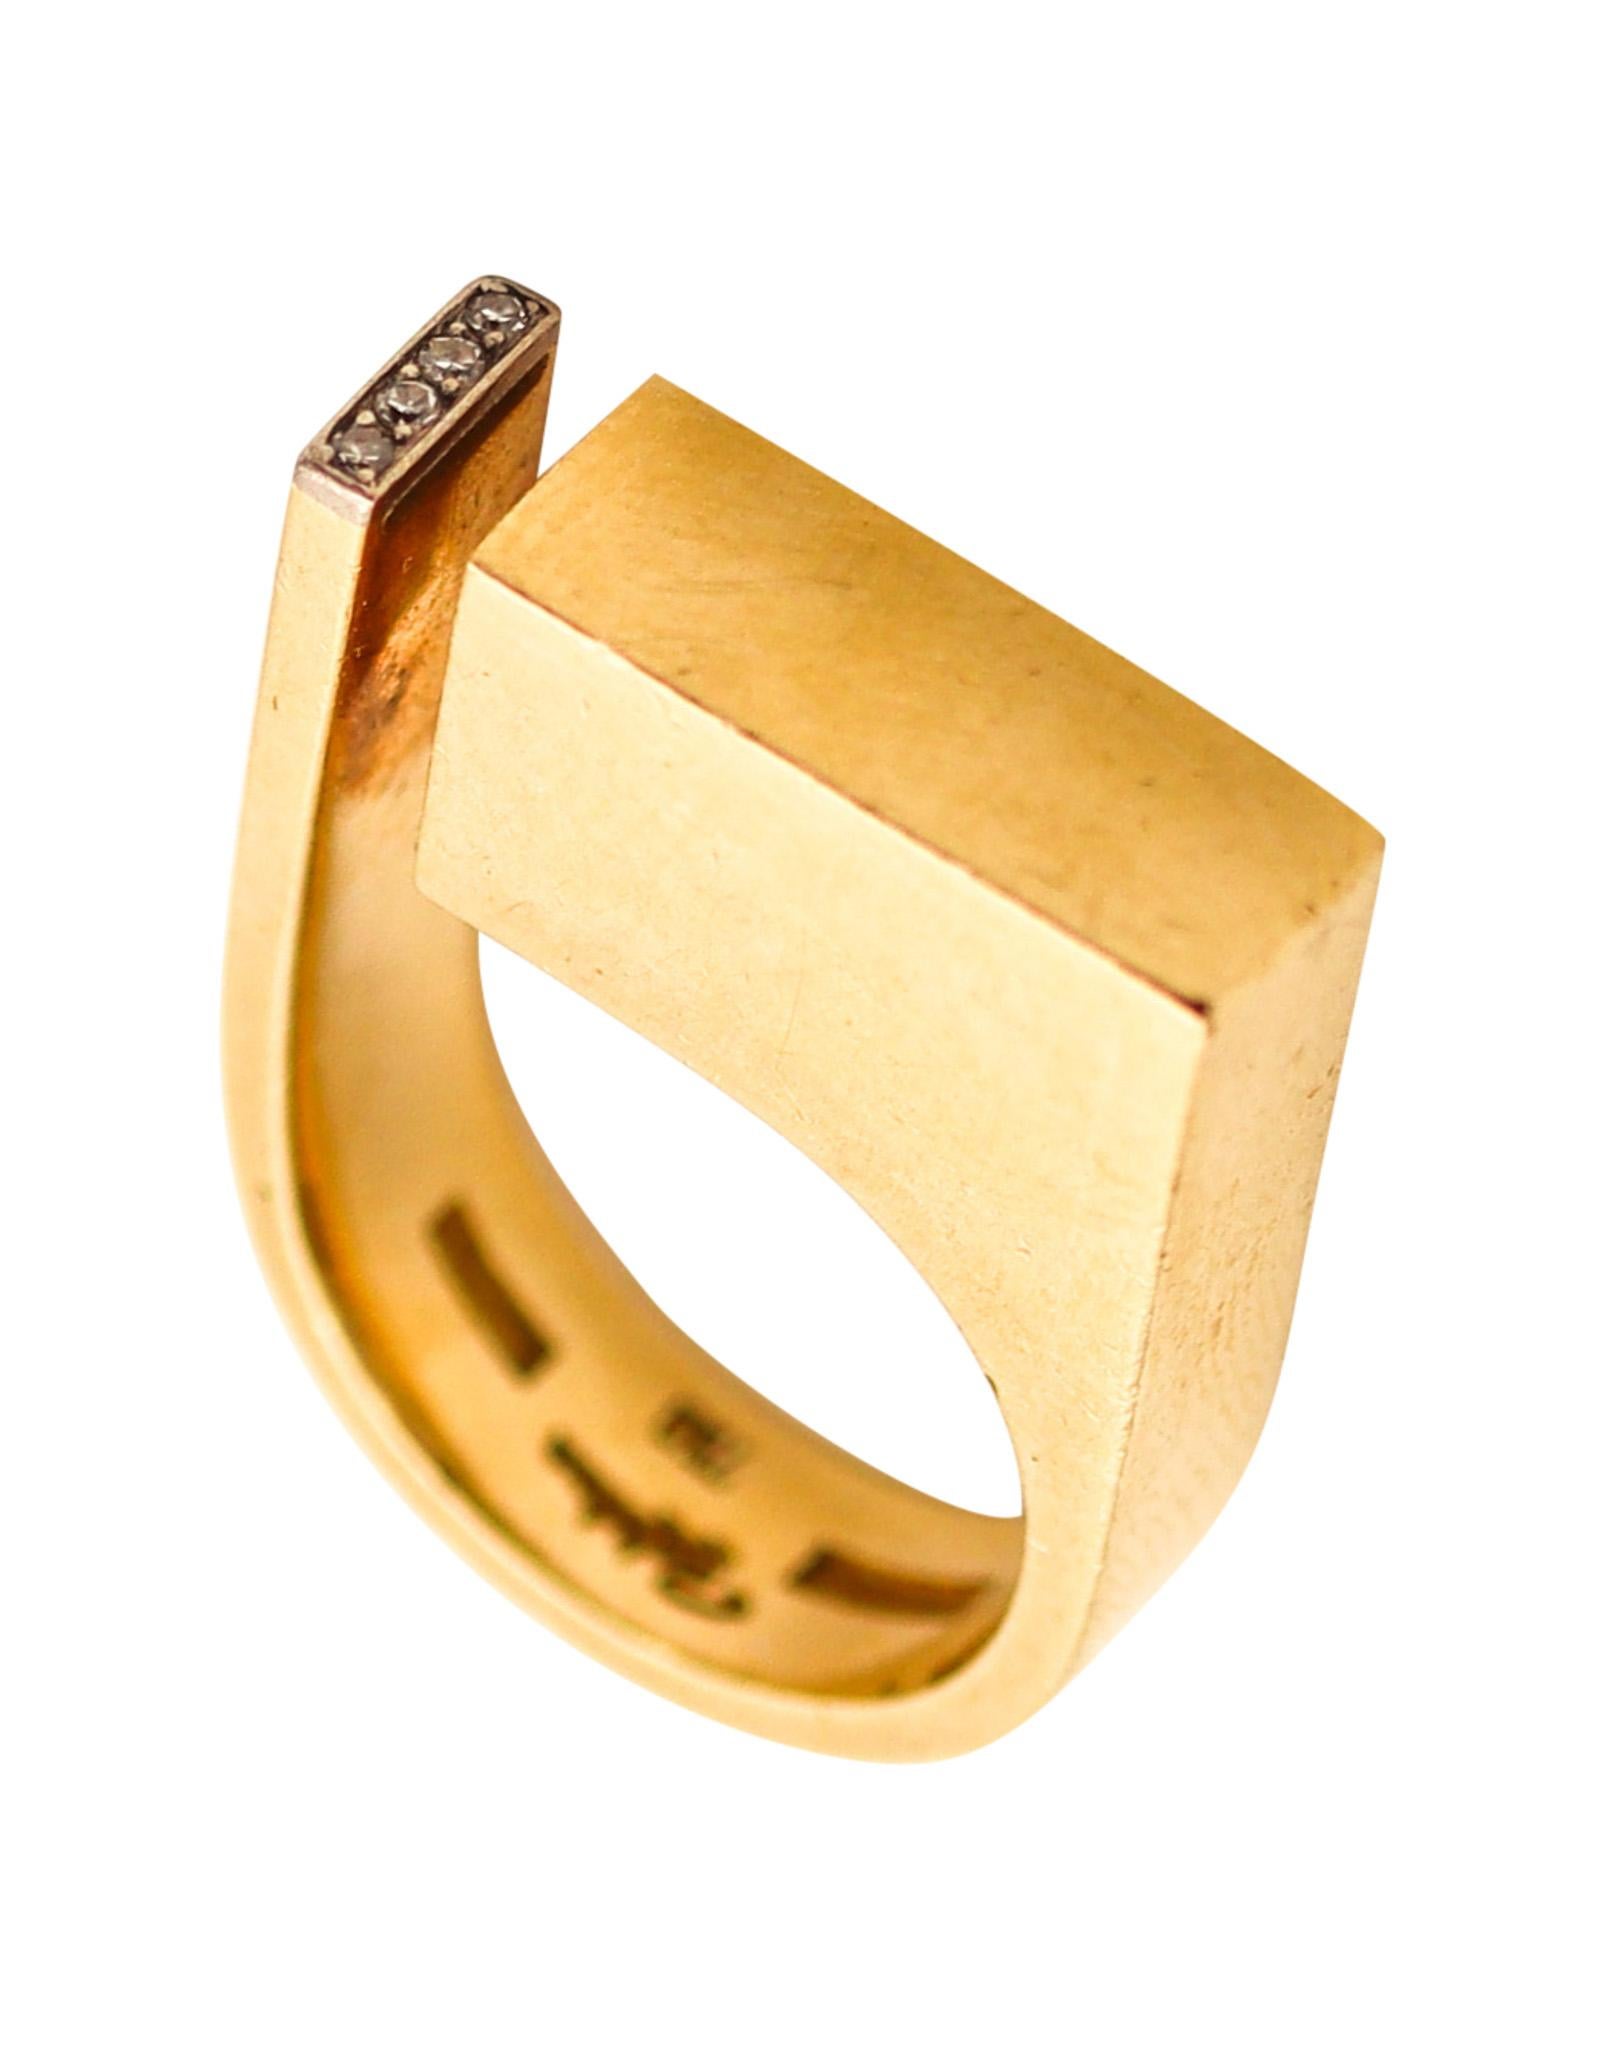 Geometric ring designed by Rey Urban (1929-2015).

Exceptional sculptural piece, created in Denmark by the artist-goldsmith Rey Urban, back in the 1969. This Scandinavian ring is quite rare since it is one of the few pieces that Rey Urban made in